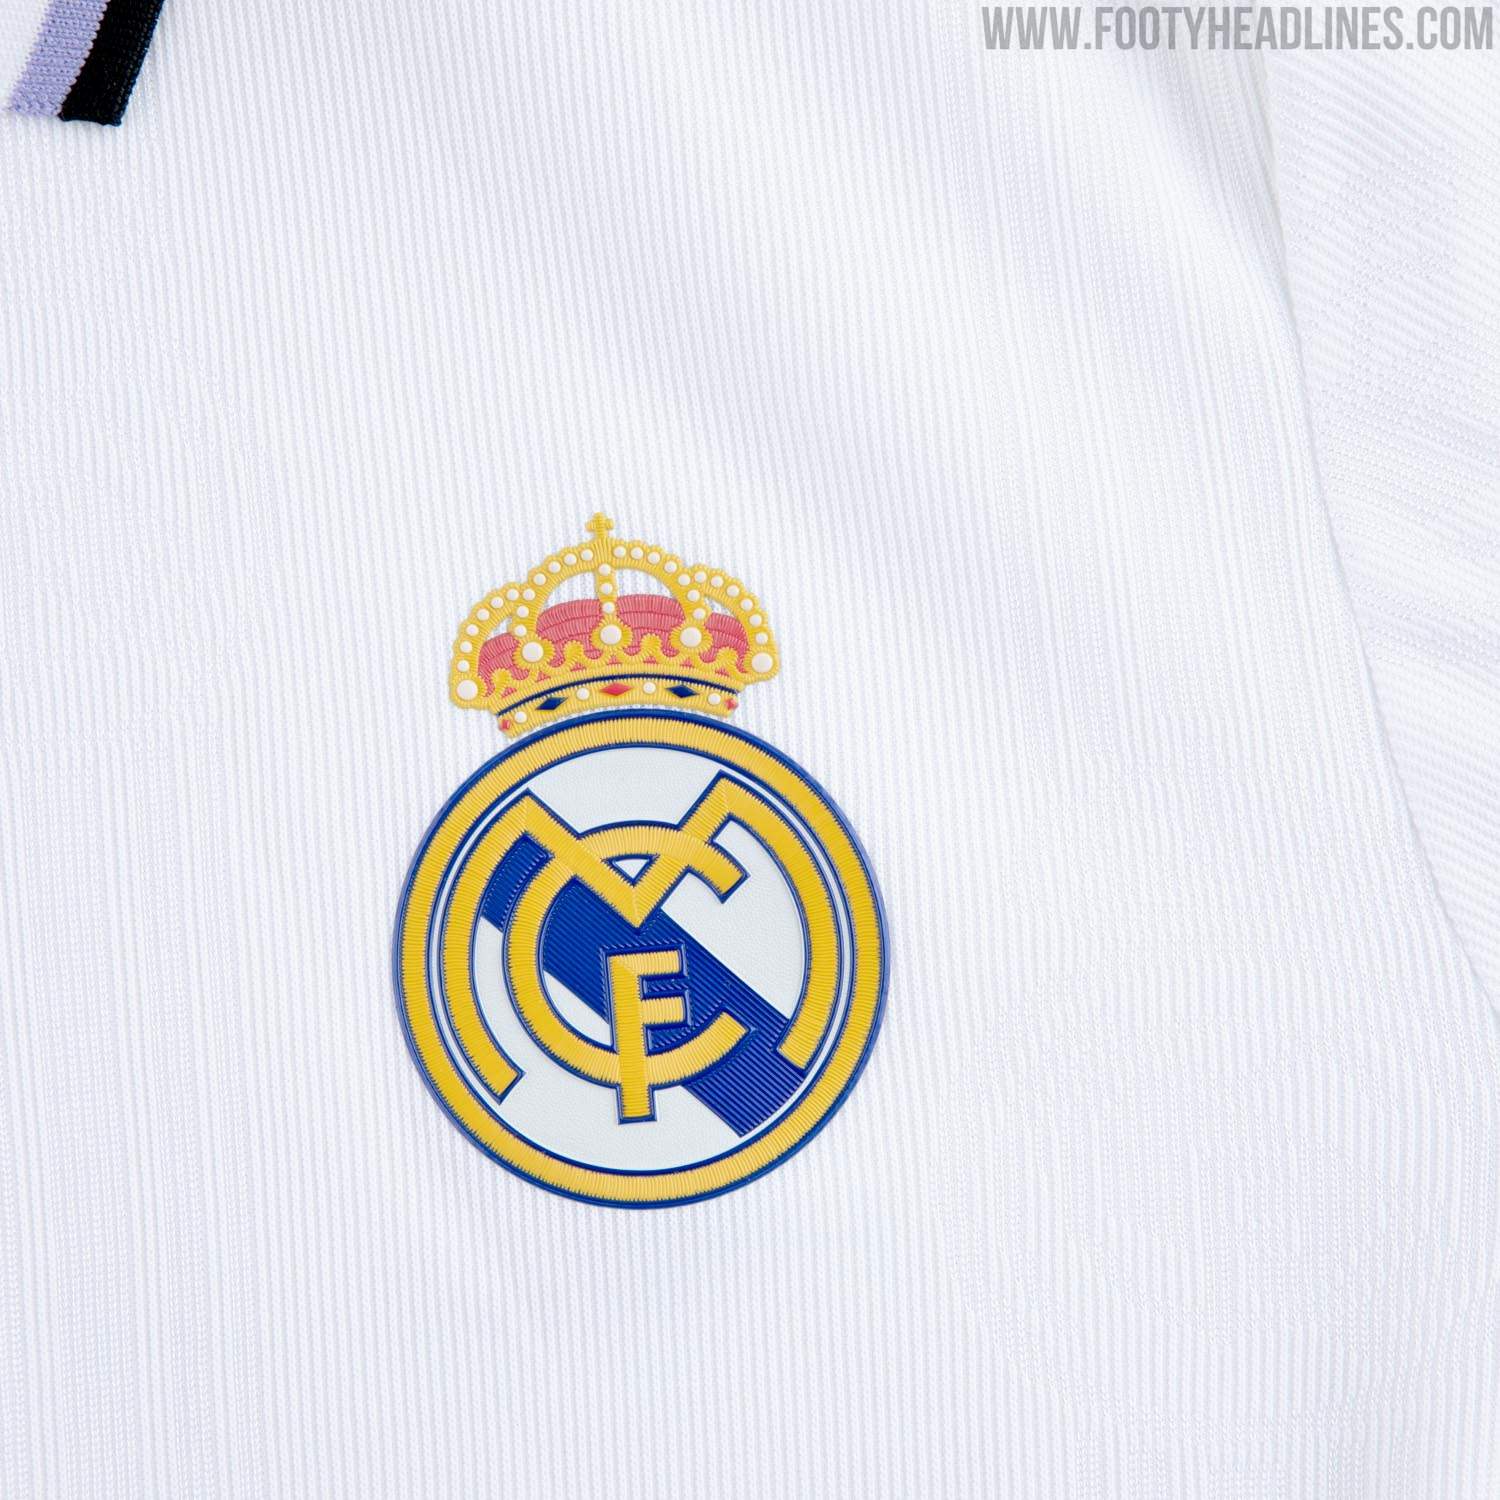 Real Madrid release 120th anniversary home kit for 2022-23 that celebrates  'the past, present and future